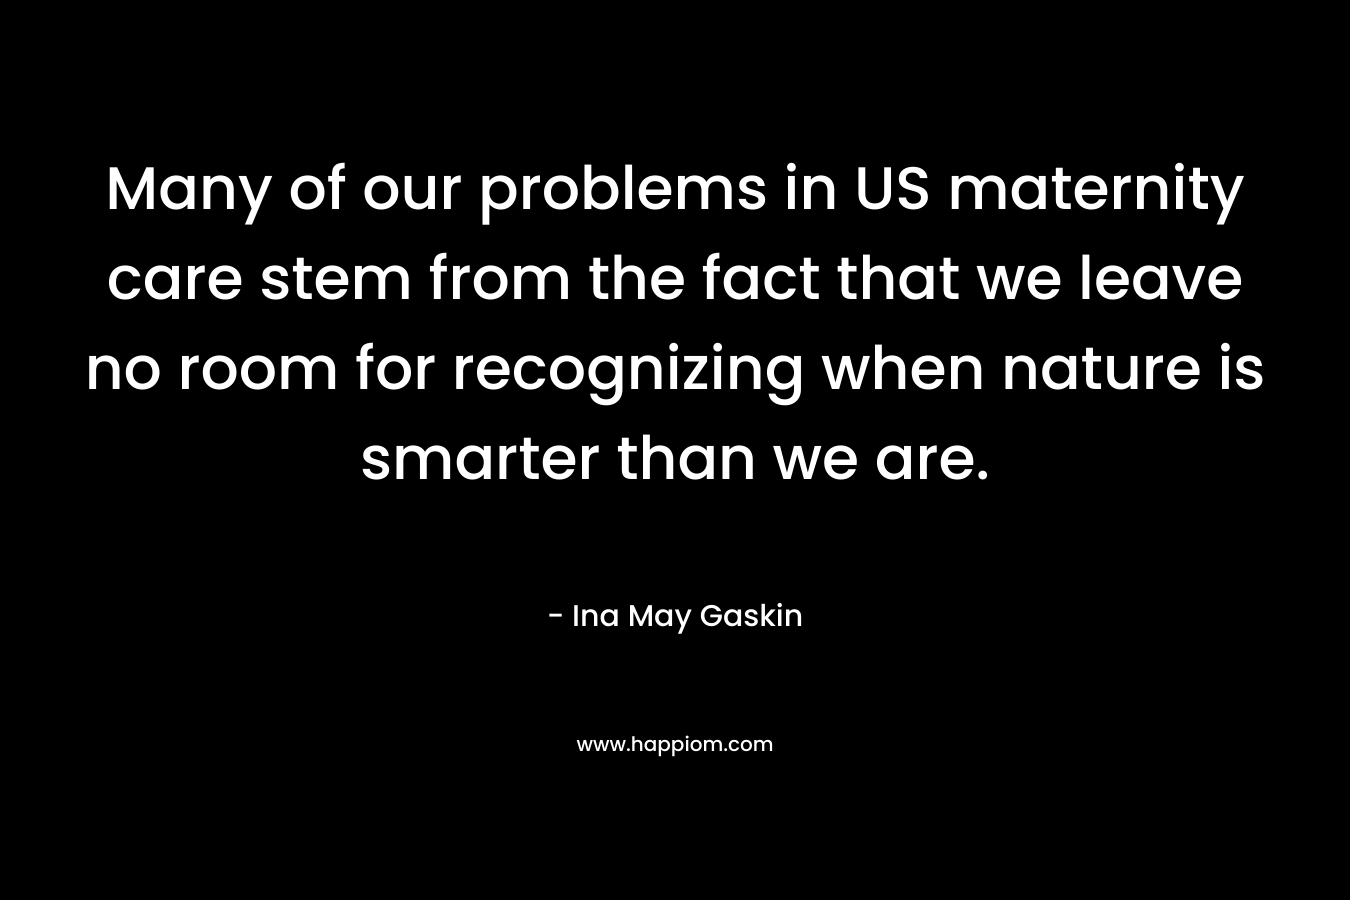 Many of our problems in US maternity care stem from the fact that we leave no room for recognizing when nature is smarter than we are.